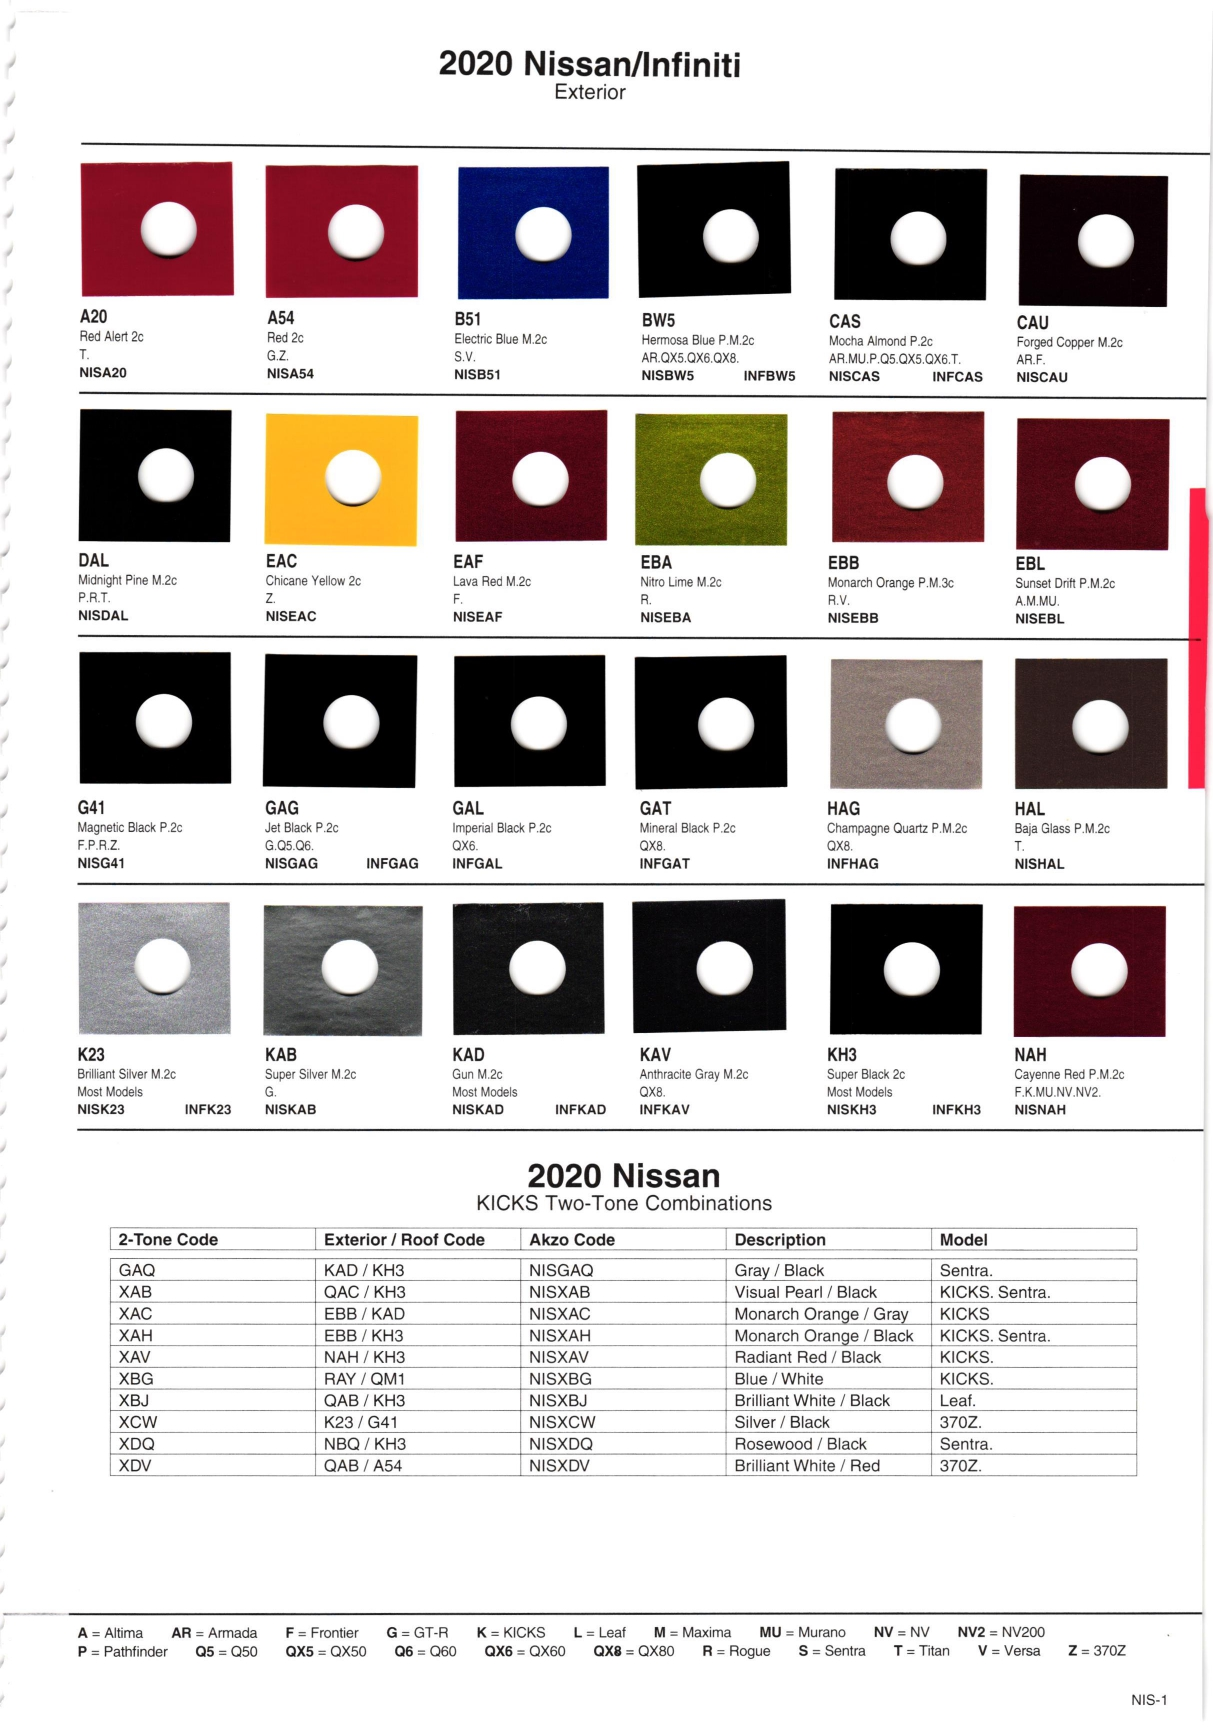 oem paint codes, color swatches color names, and mixing stock numbers along with  modesl for 2020 Nissan and Infiniti vehicles.